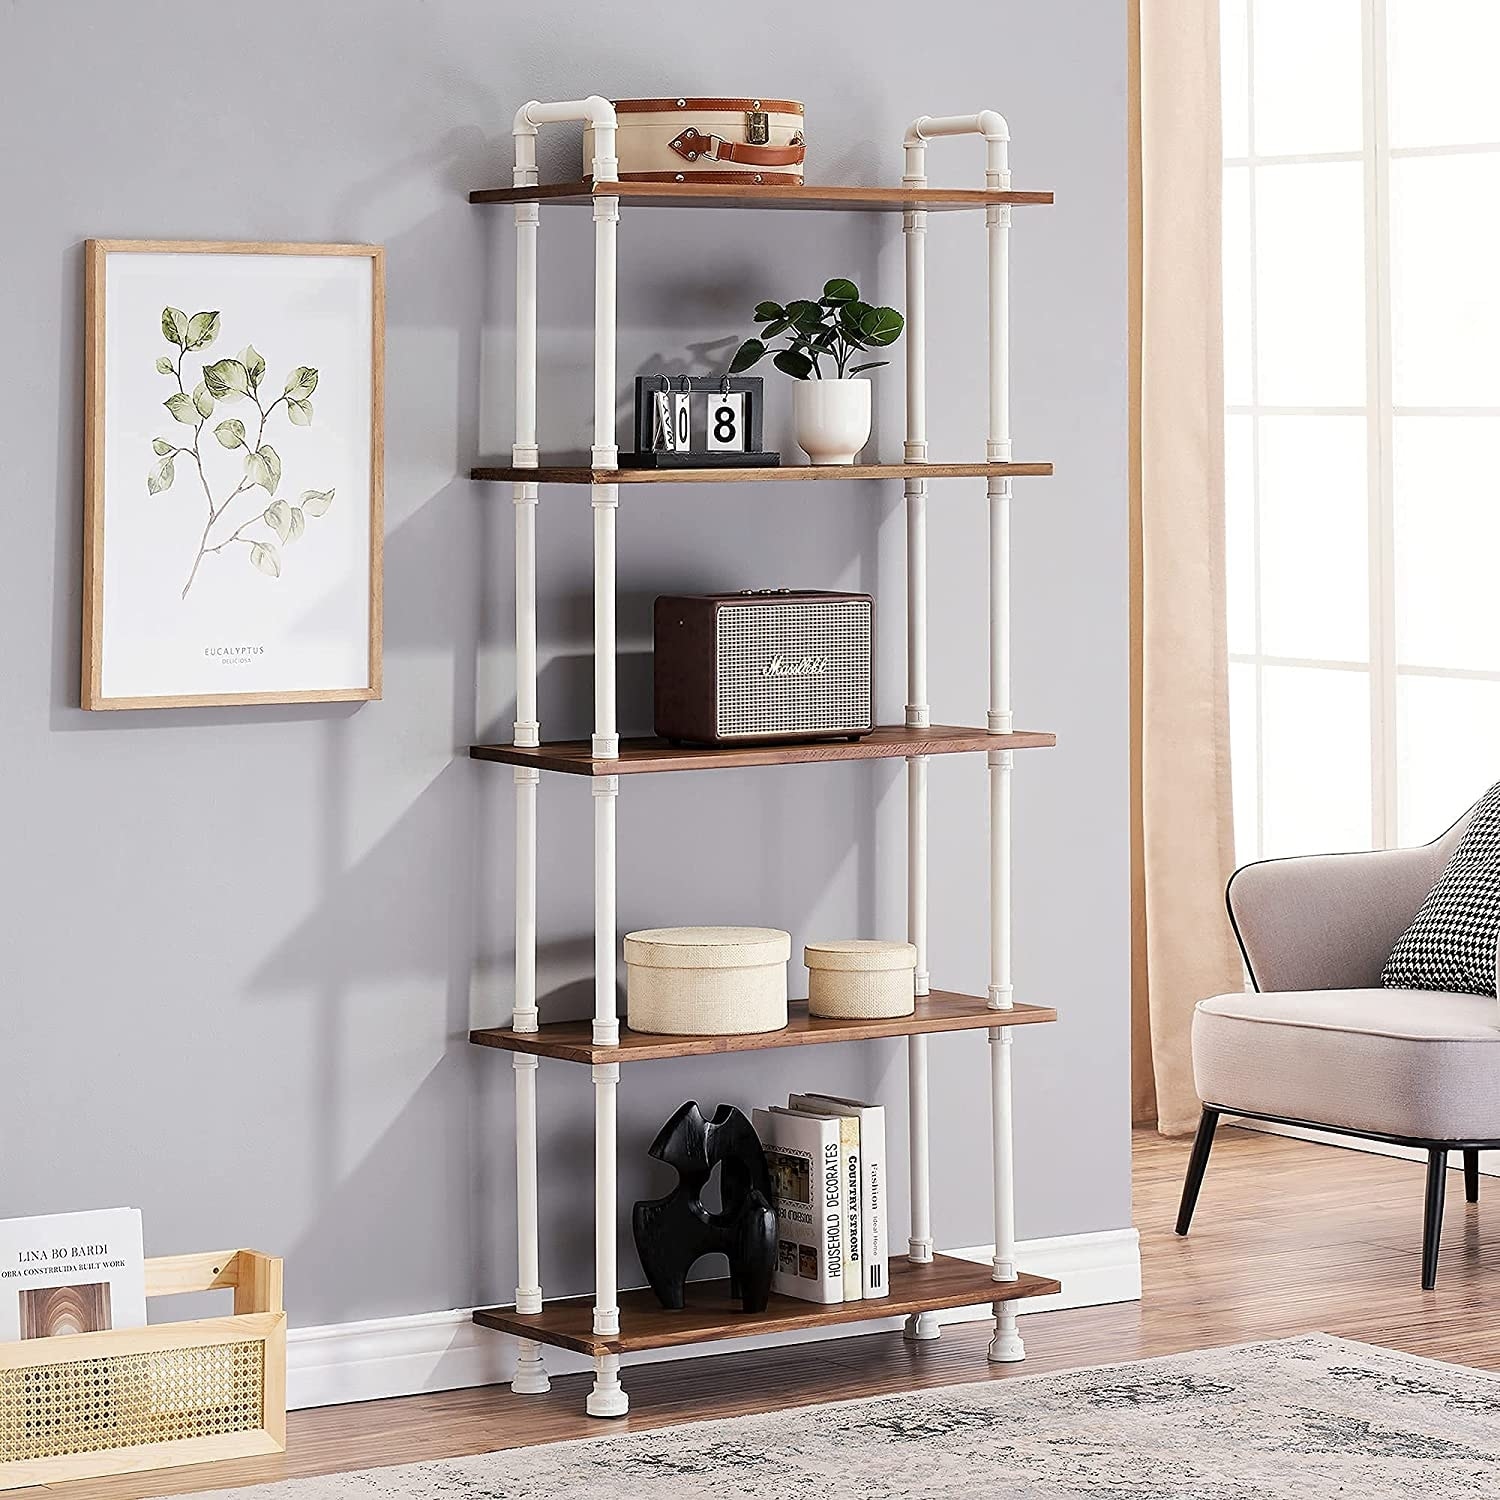 https://ak1.ostkcdn.com/images/products/is/images/direct/7d5f518ab0799d6b95ac88ae302249bc13d1ea6e/Ivinta-White-Bookshelf%2C-Industrial-Pipe-Bookcase%2C-3-4-5-Tier-Walnut-Solid-Wood-Shelf.jpg